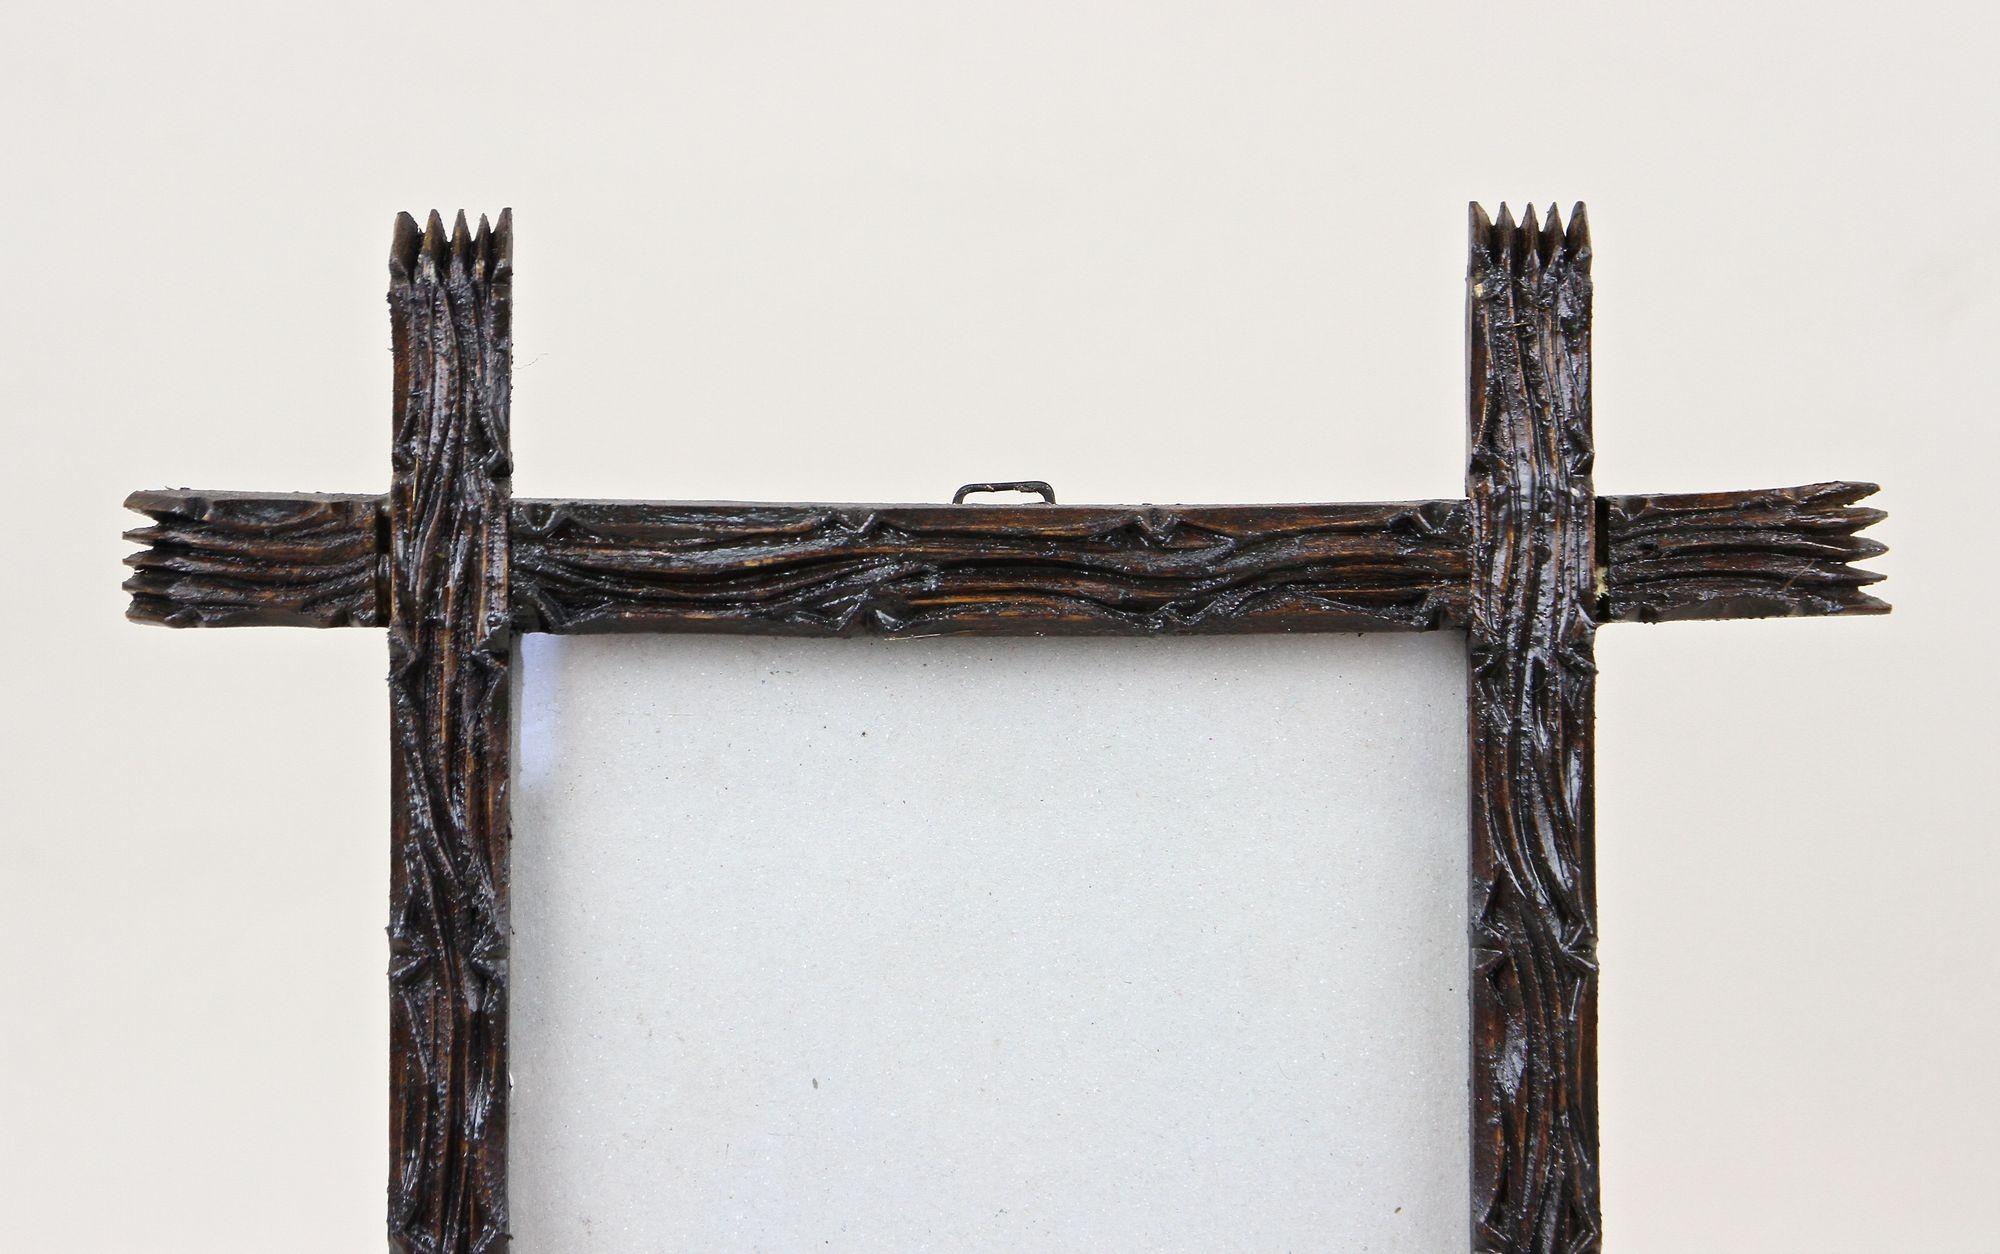 Hand-Carved Rustic Wooden Photo Frame, Black Forest Style - Handcarved, Austria circa 1860